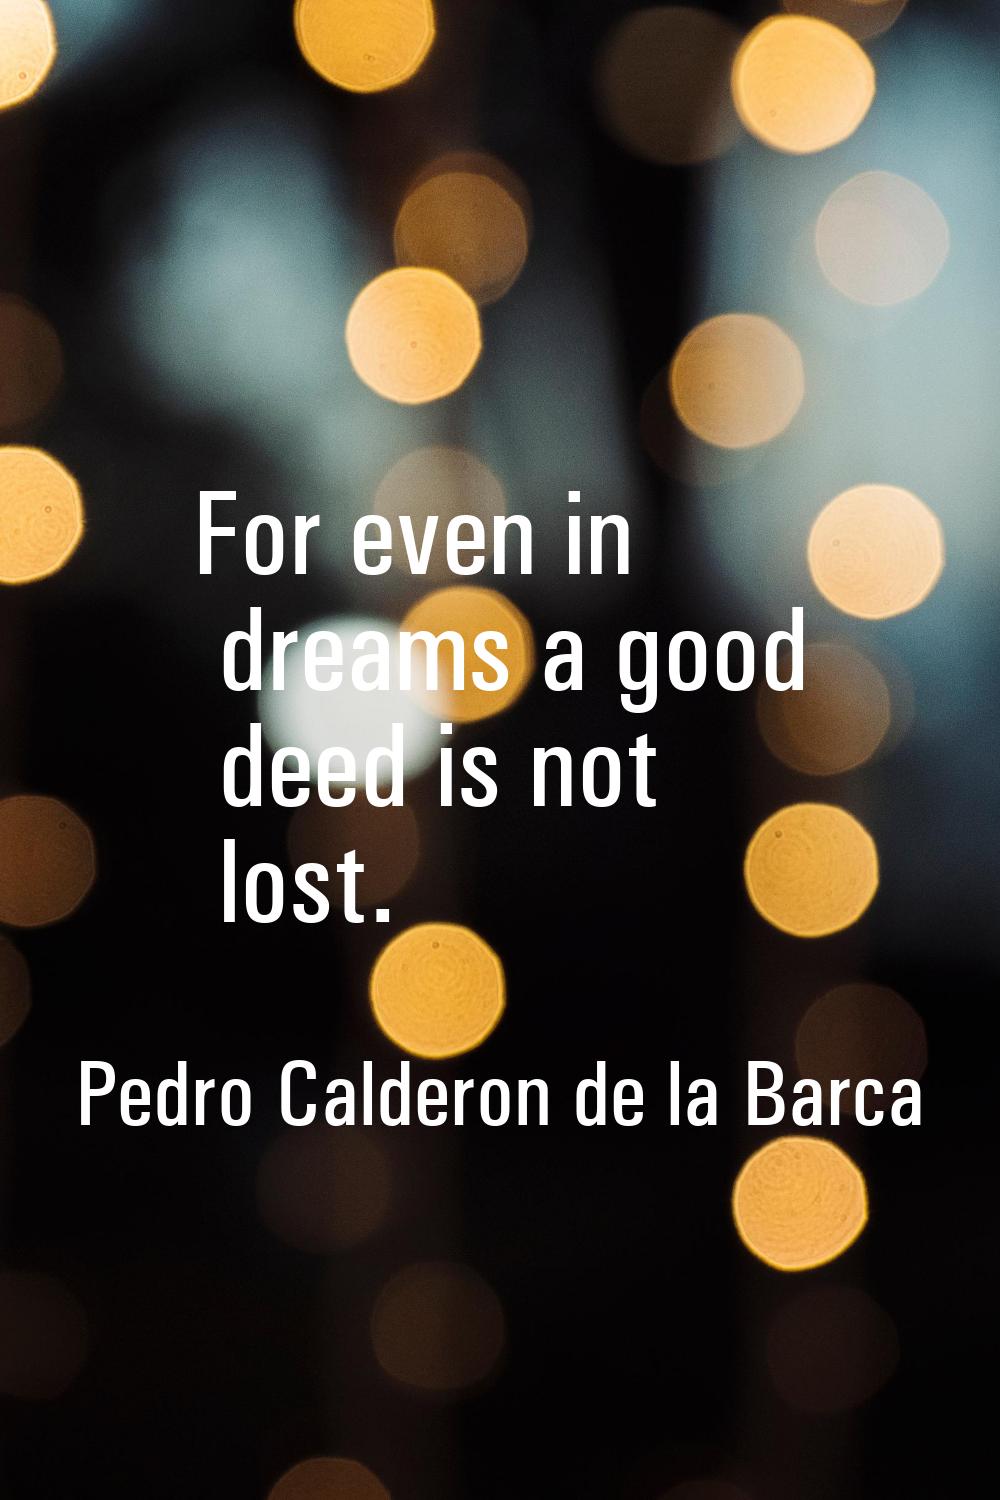 For even in dreams a good deed is not lost.